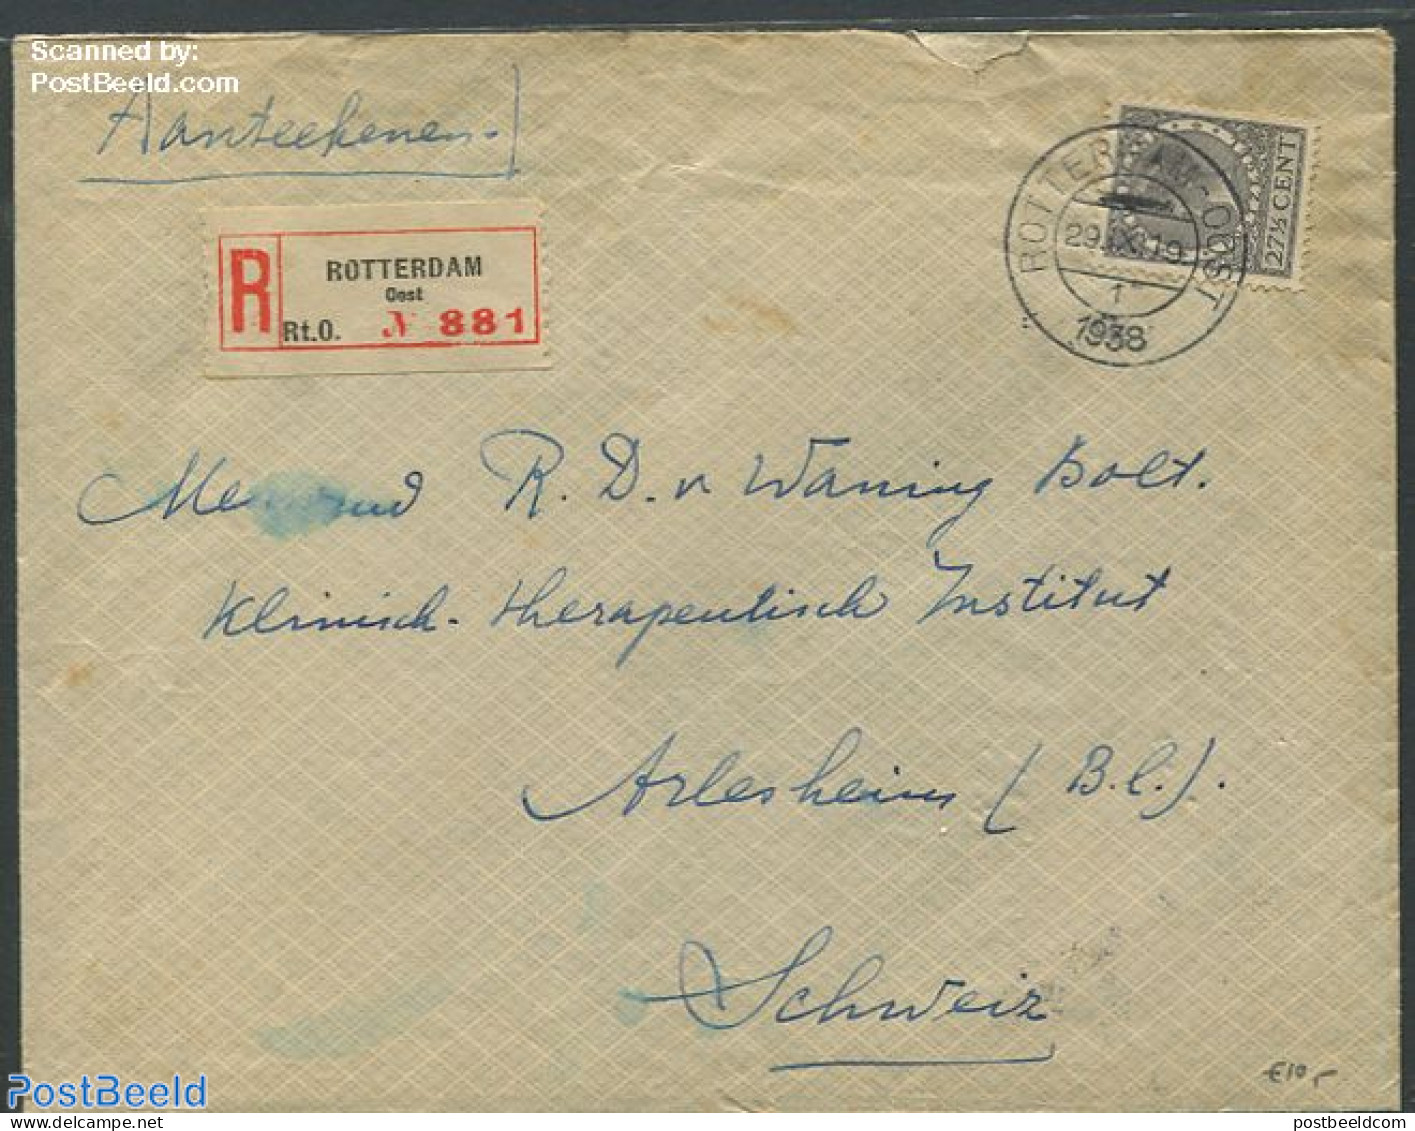 Netherlands 1928 Registered Cover From Rotterdam With Nvhp No.193, Postal History, History - Kings & Queens (Royalty) - Covers & Documents